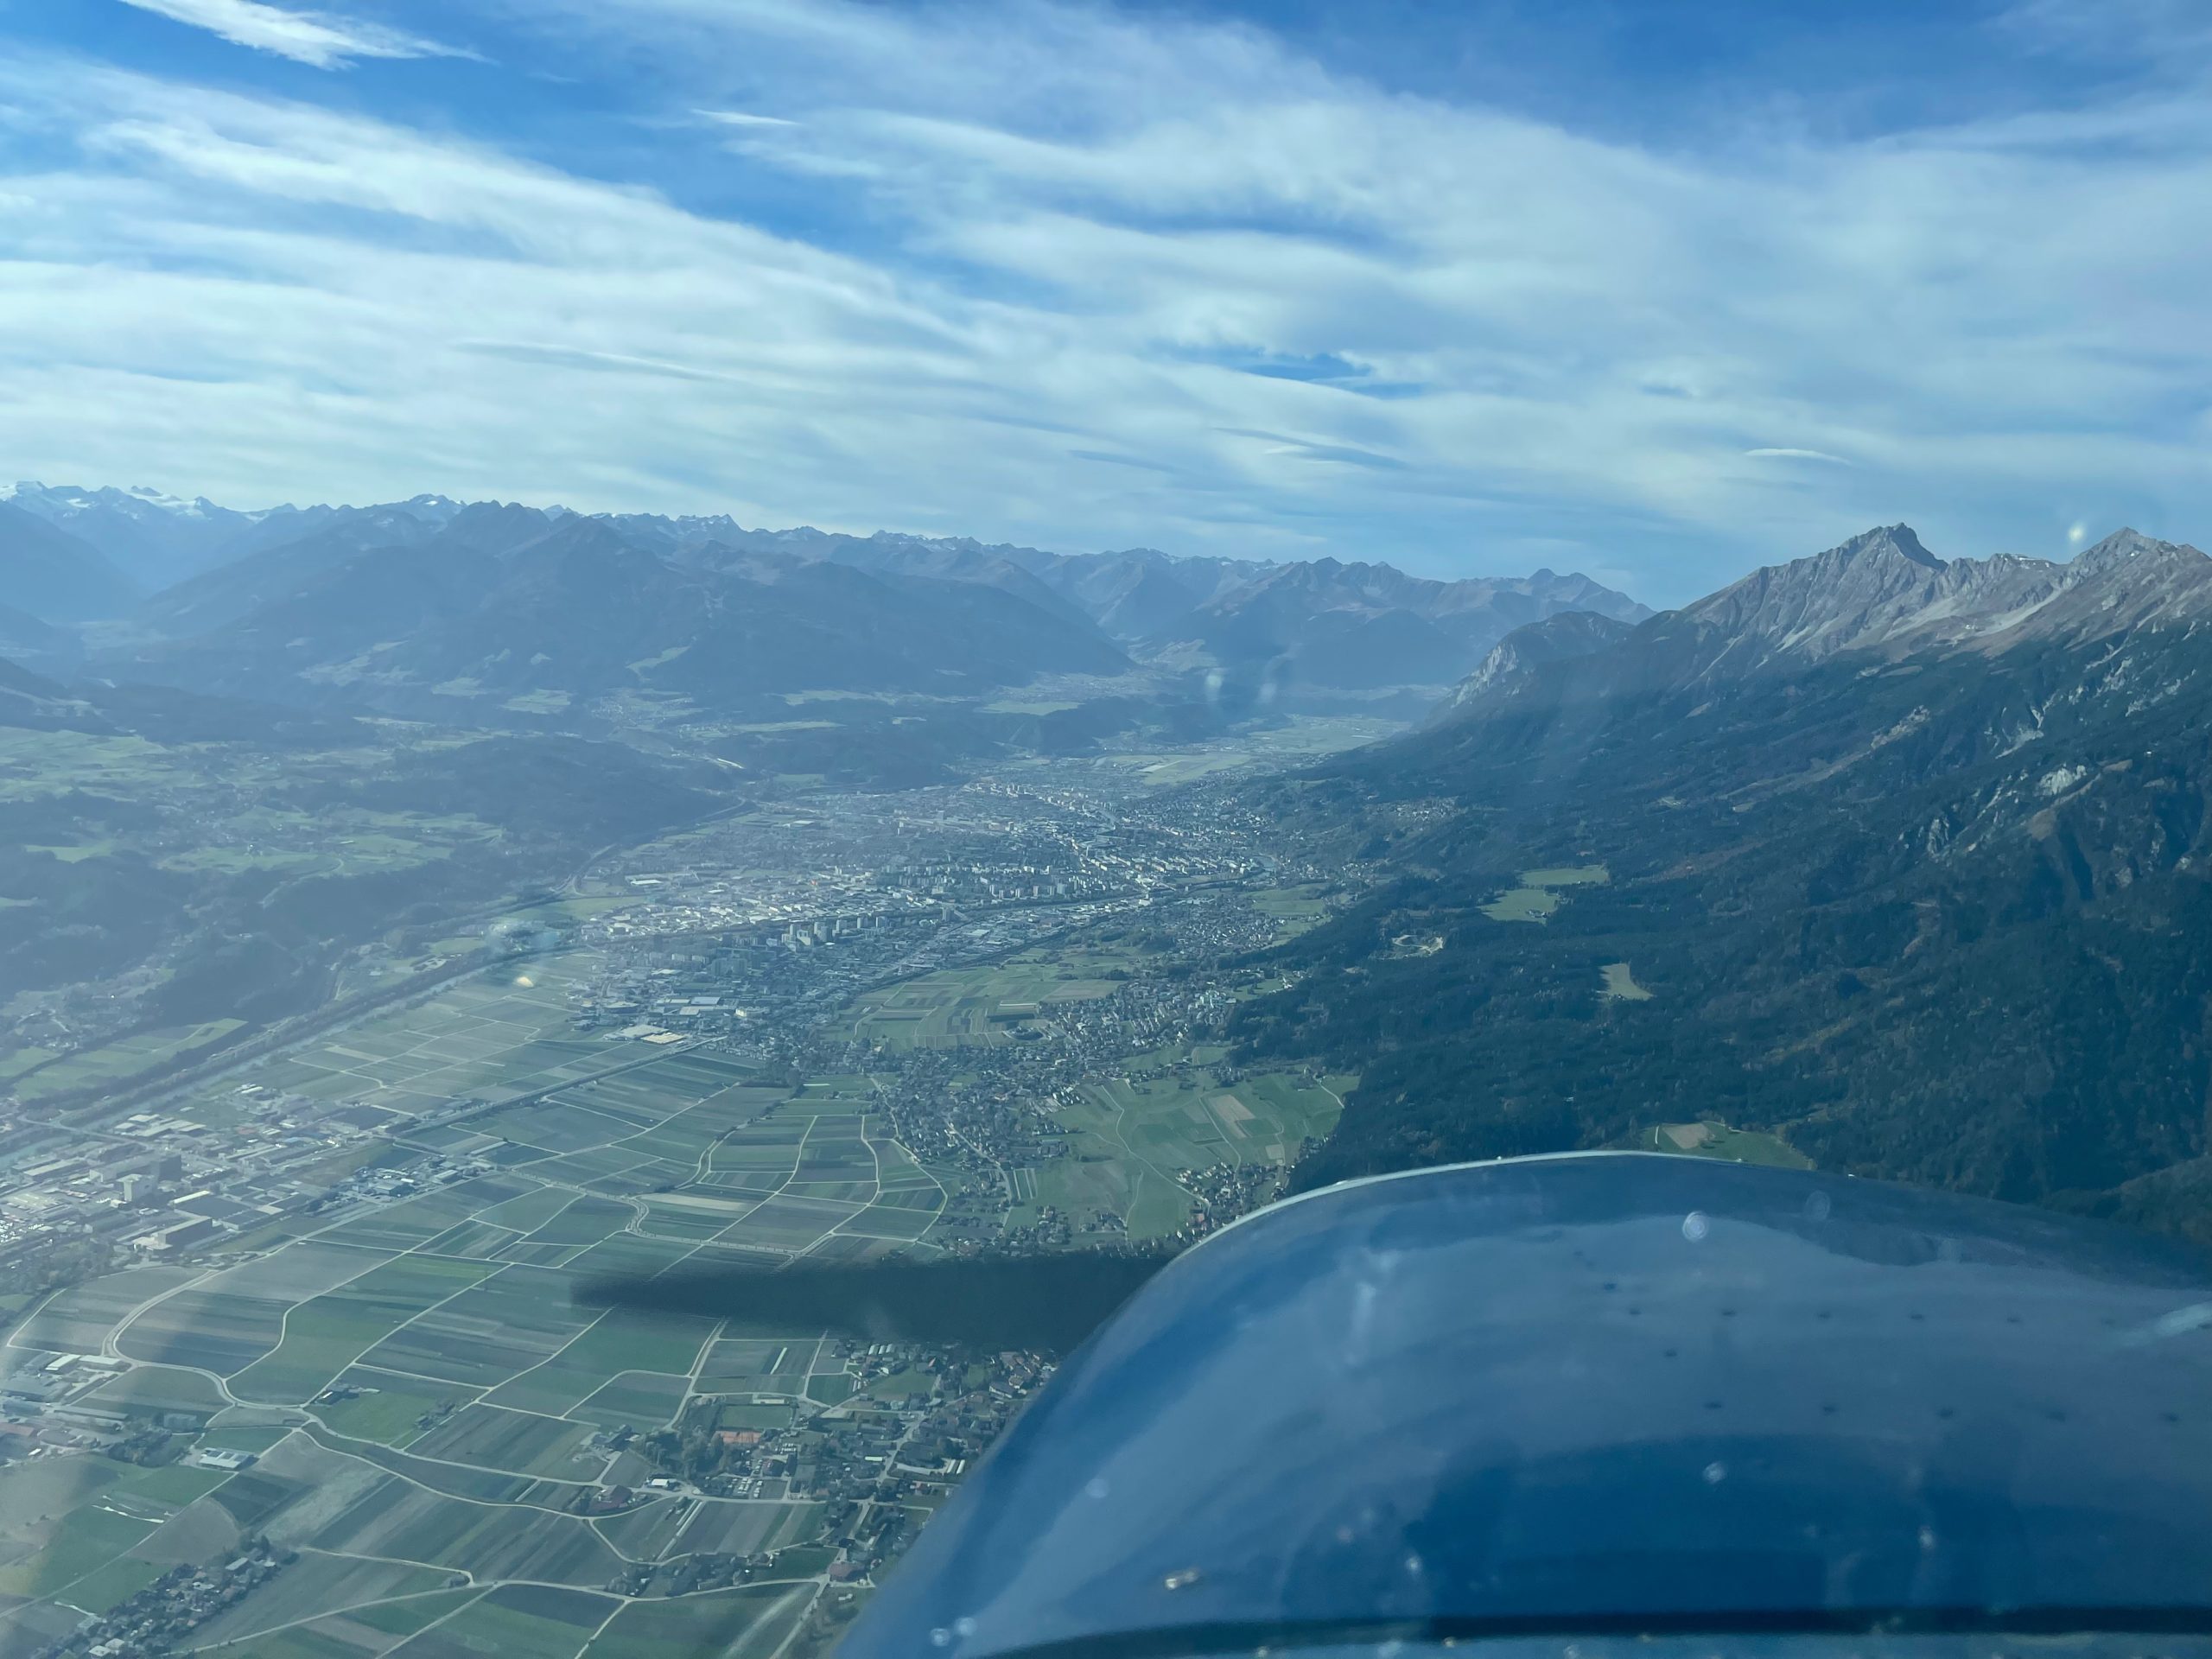 That’s Innsbruck airport and as much as it looks serene the wind was unforgiving